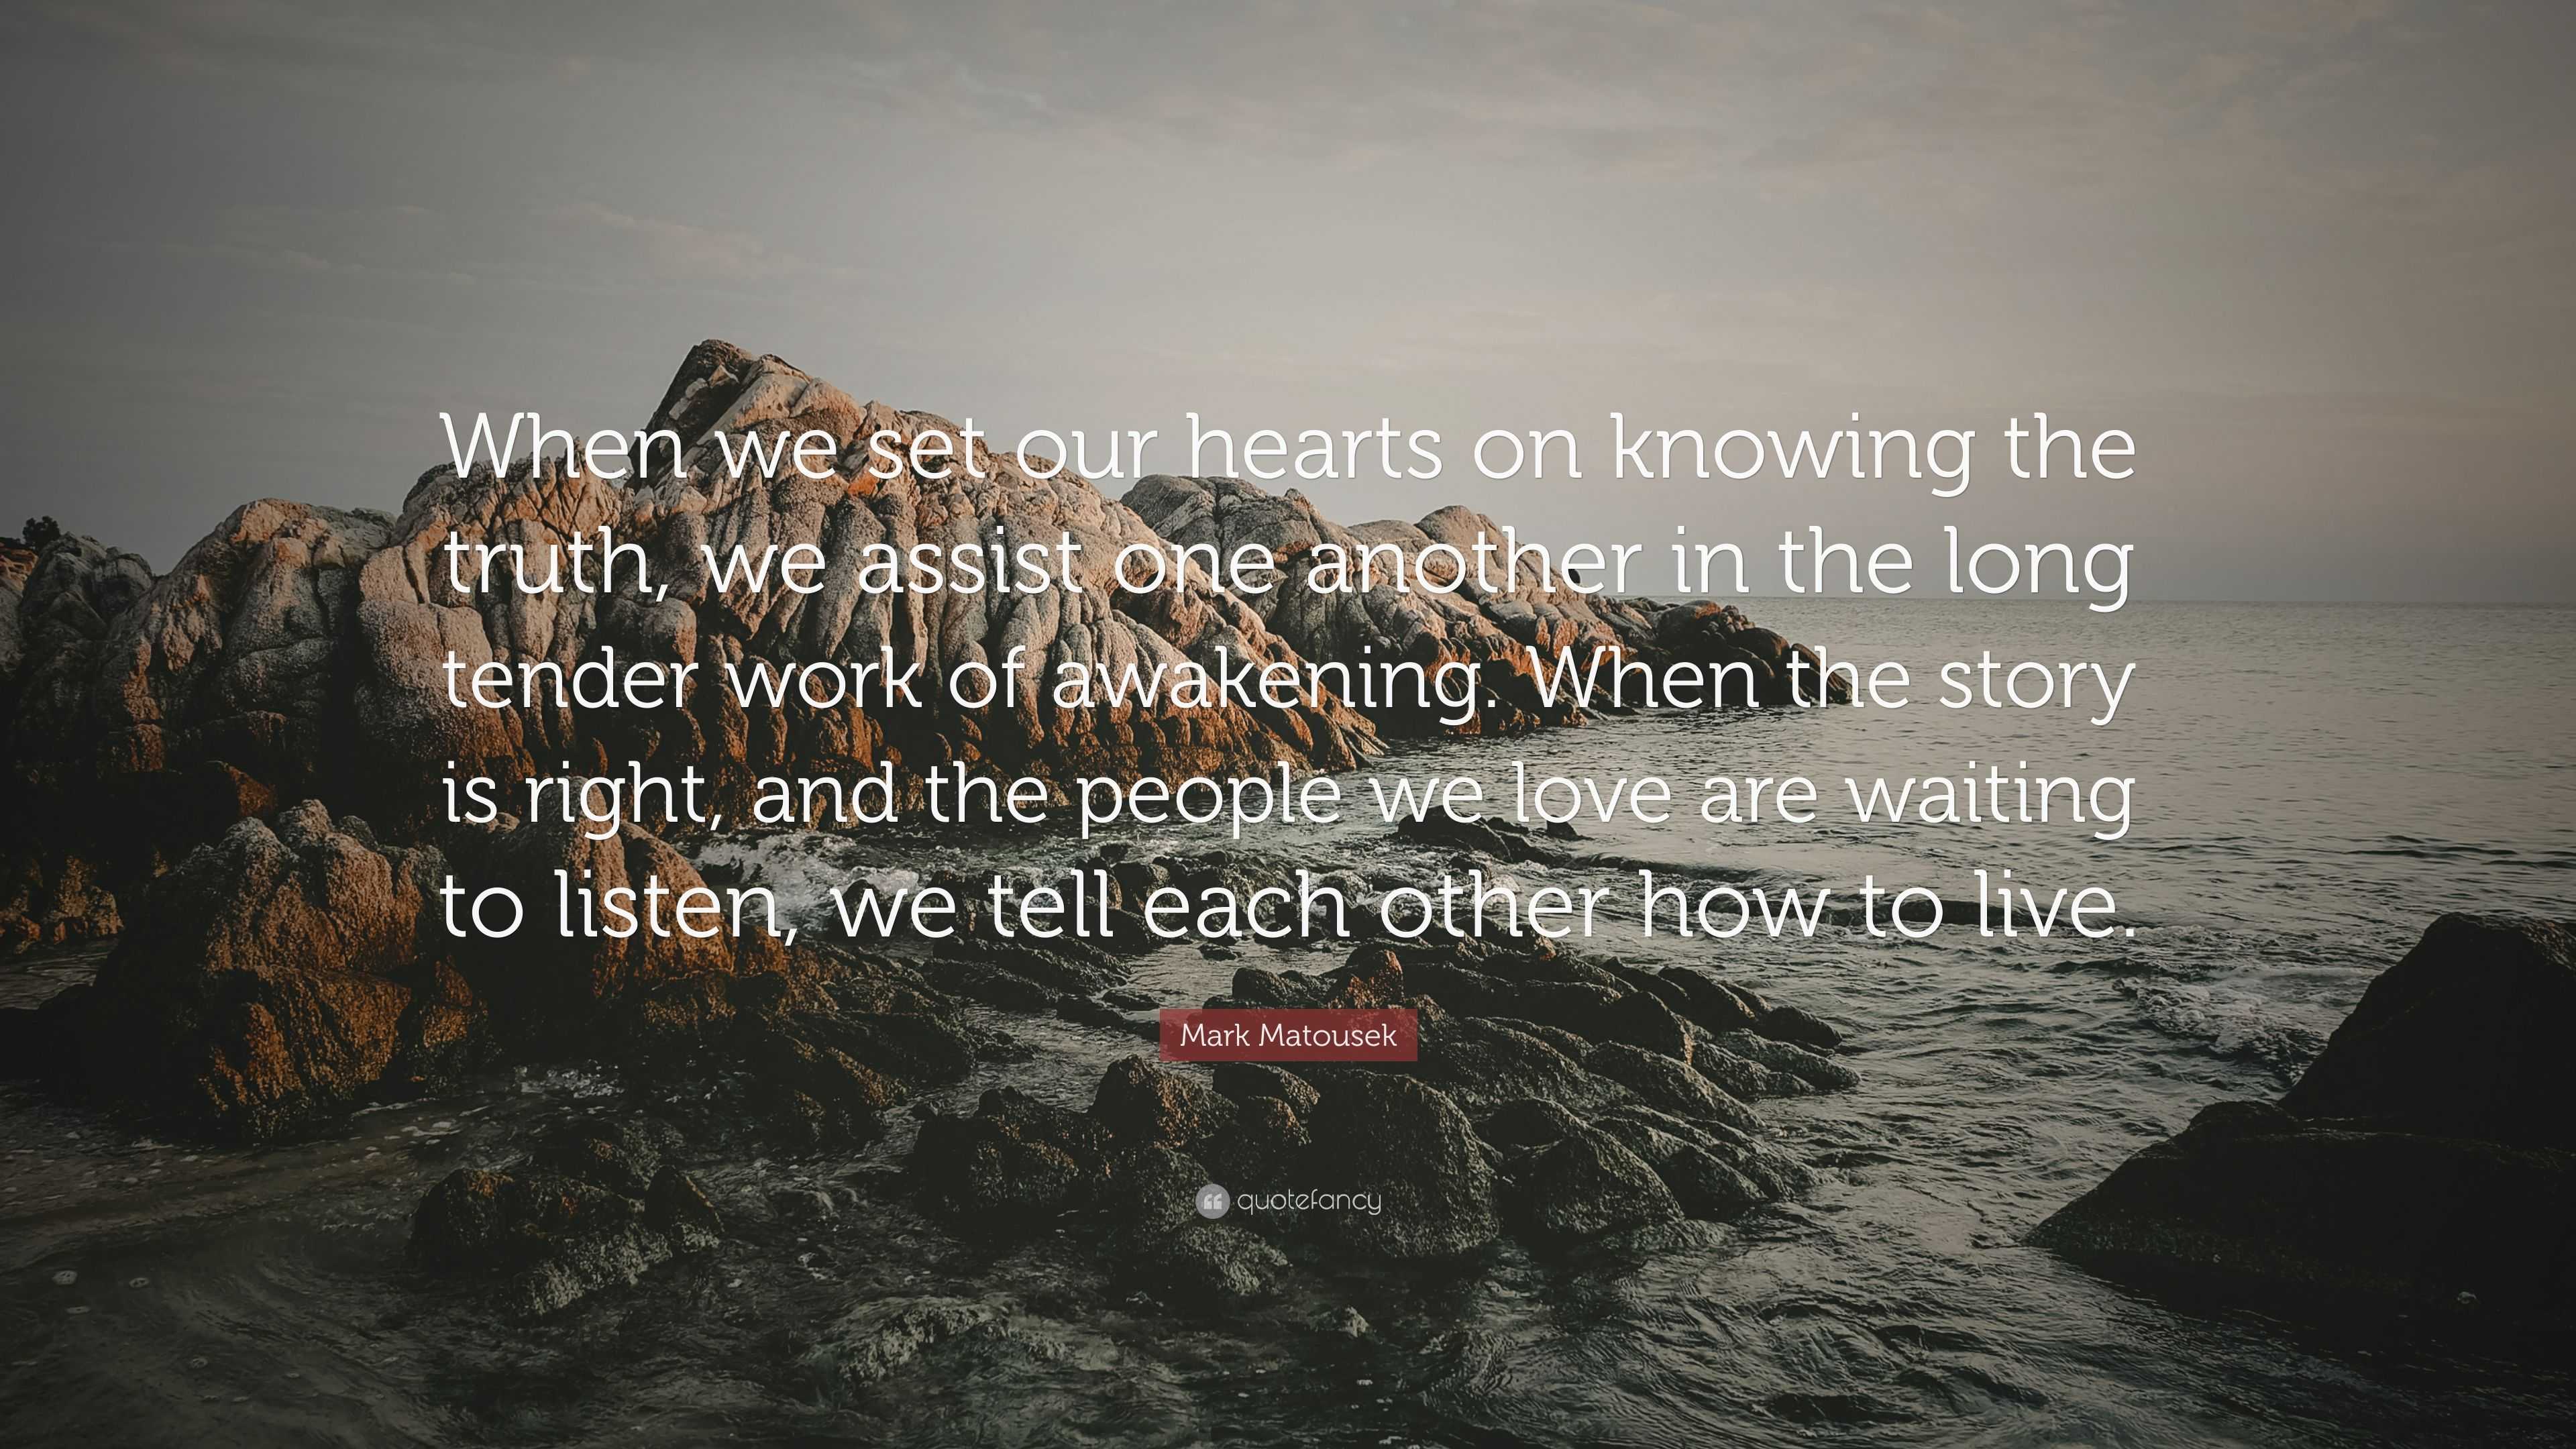 Mark Matousek Quote: “When we set our hearts on knowing the truth, we ...